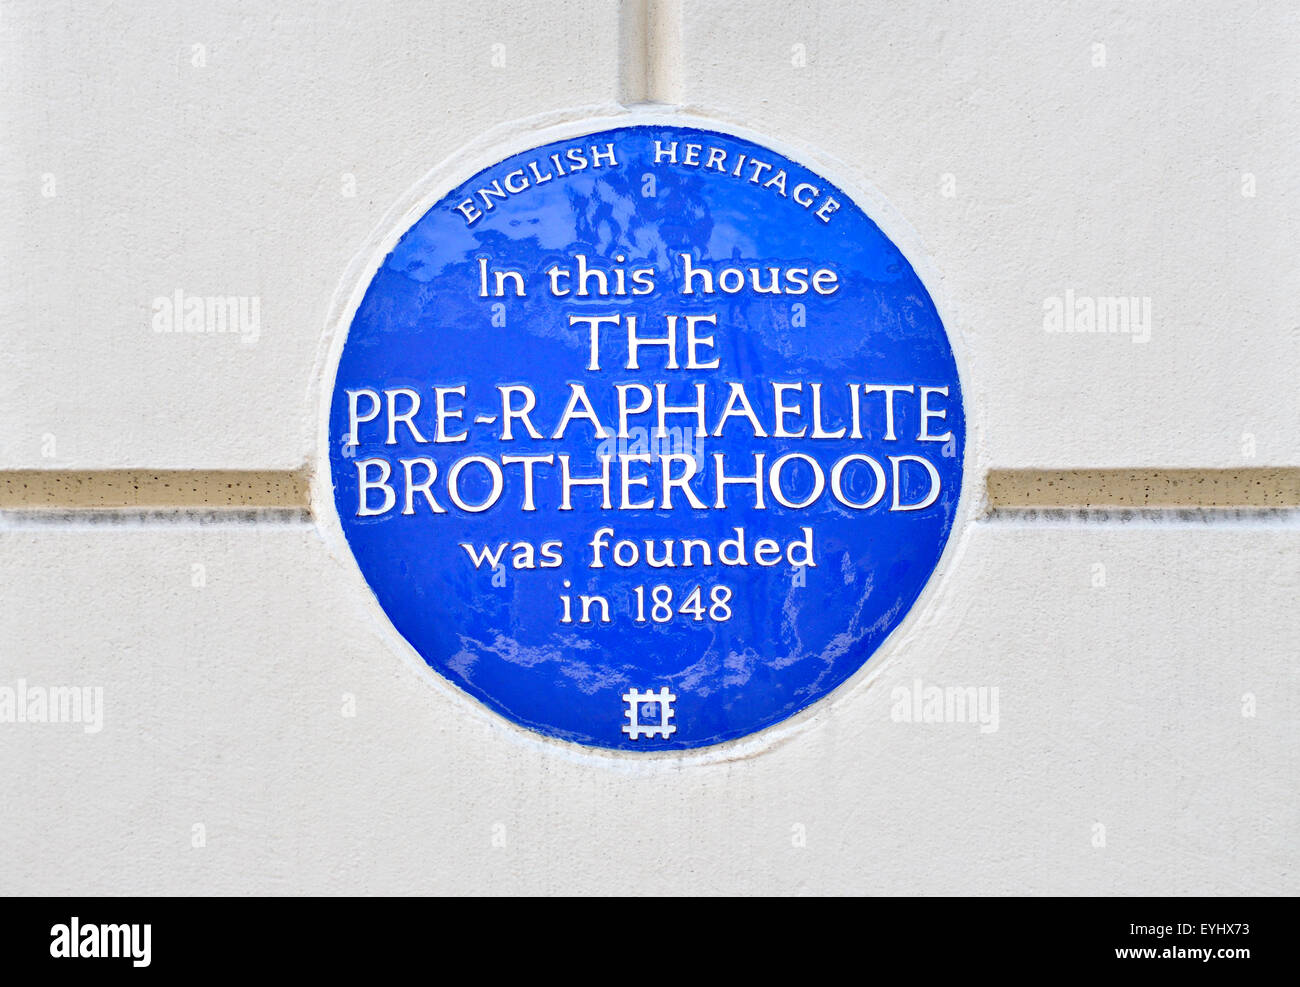 London, England, UK. Blue plaque at 7 Gower Street, Camden. 'In this house THE PRE-RAPHAELITE BROTHERHOOD was founded in 1848' Stock Photo